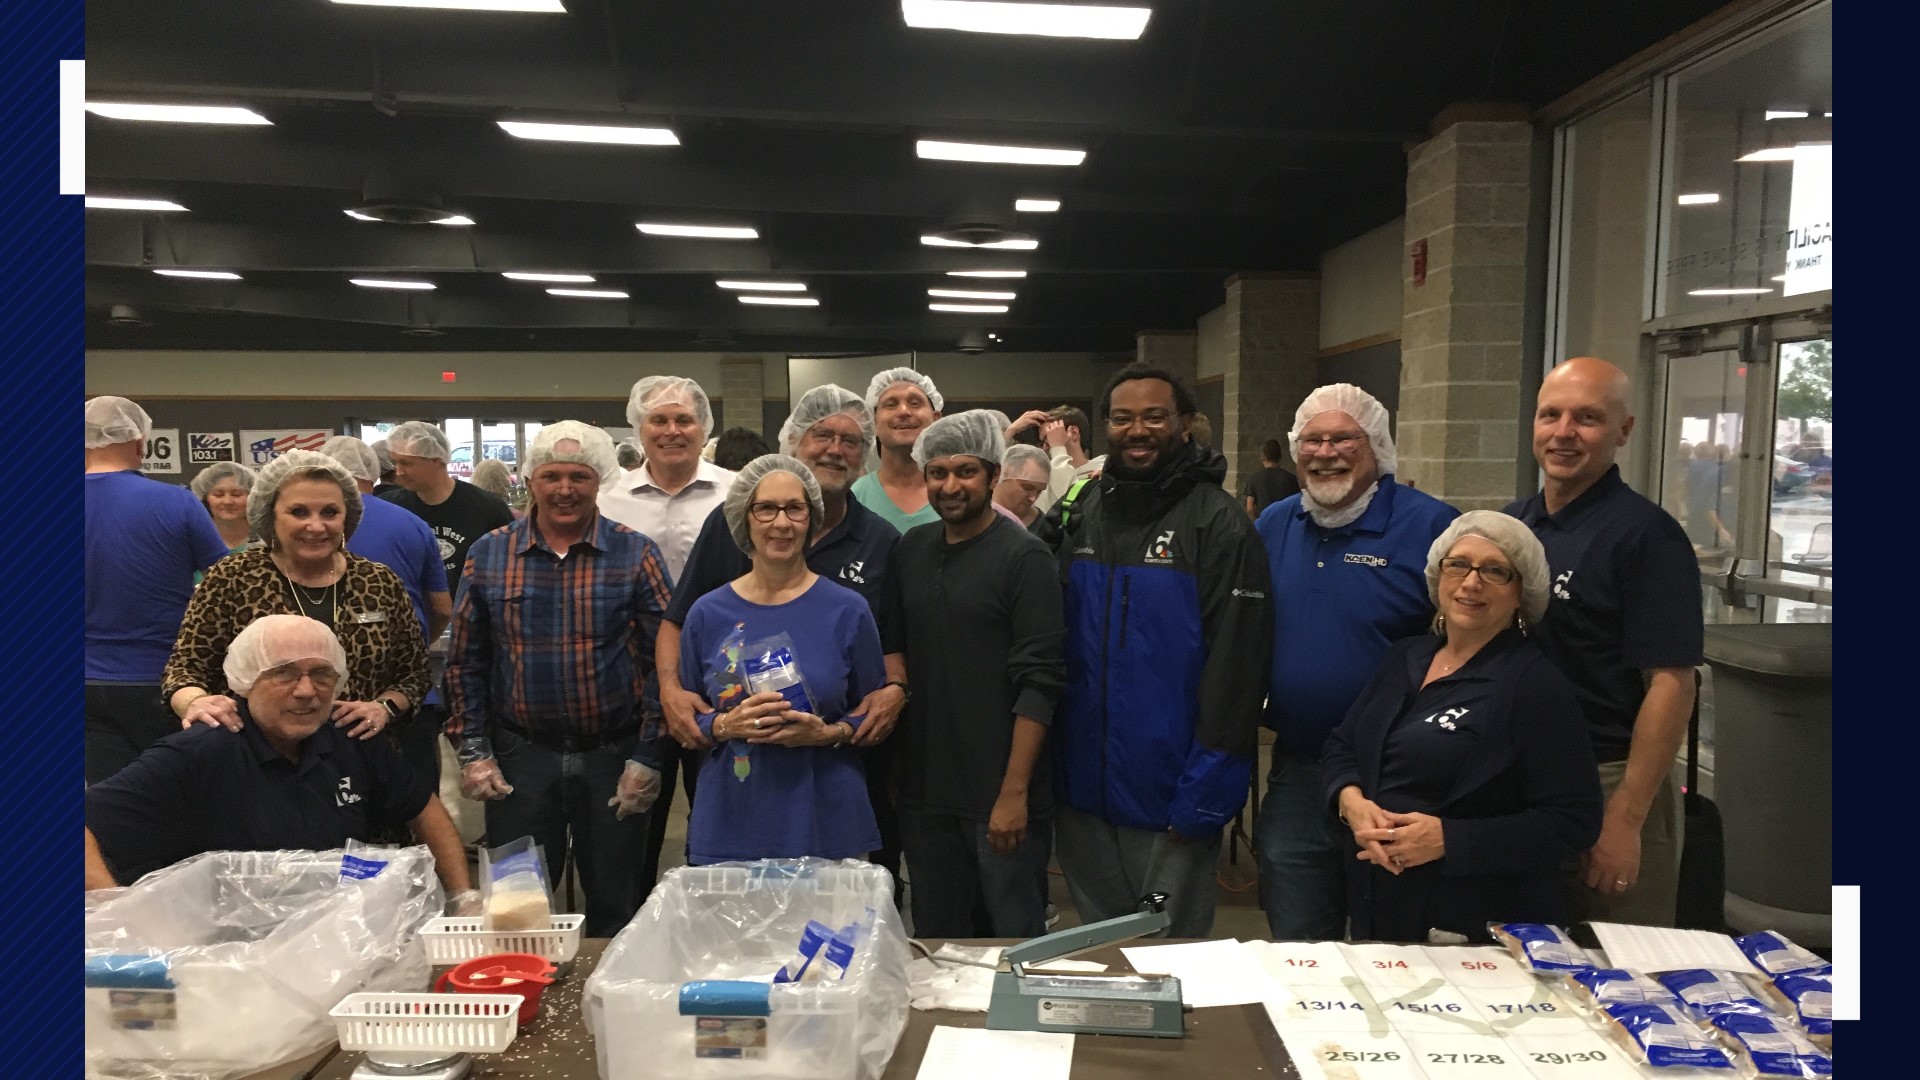 Kids Against Hunger teamed up with the Belton community to provide meals for hungry families locally and internationally.